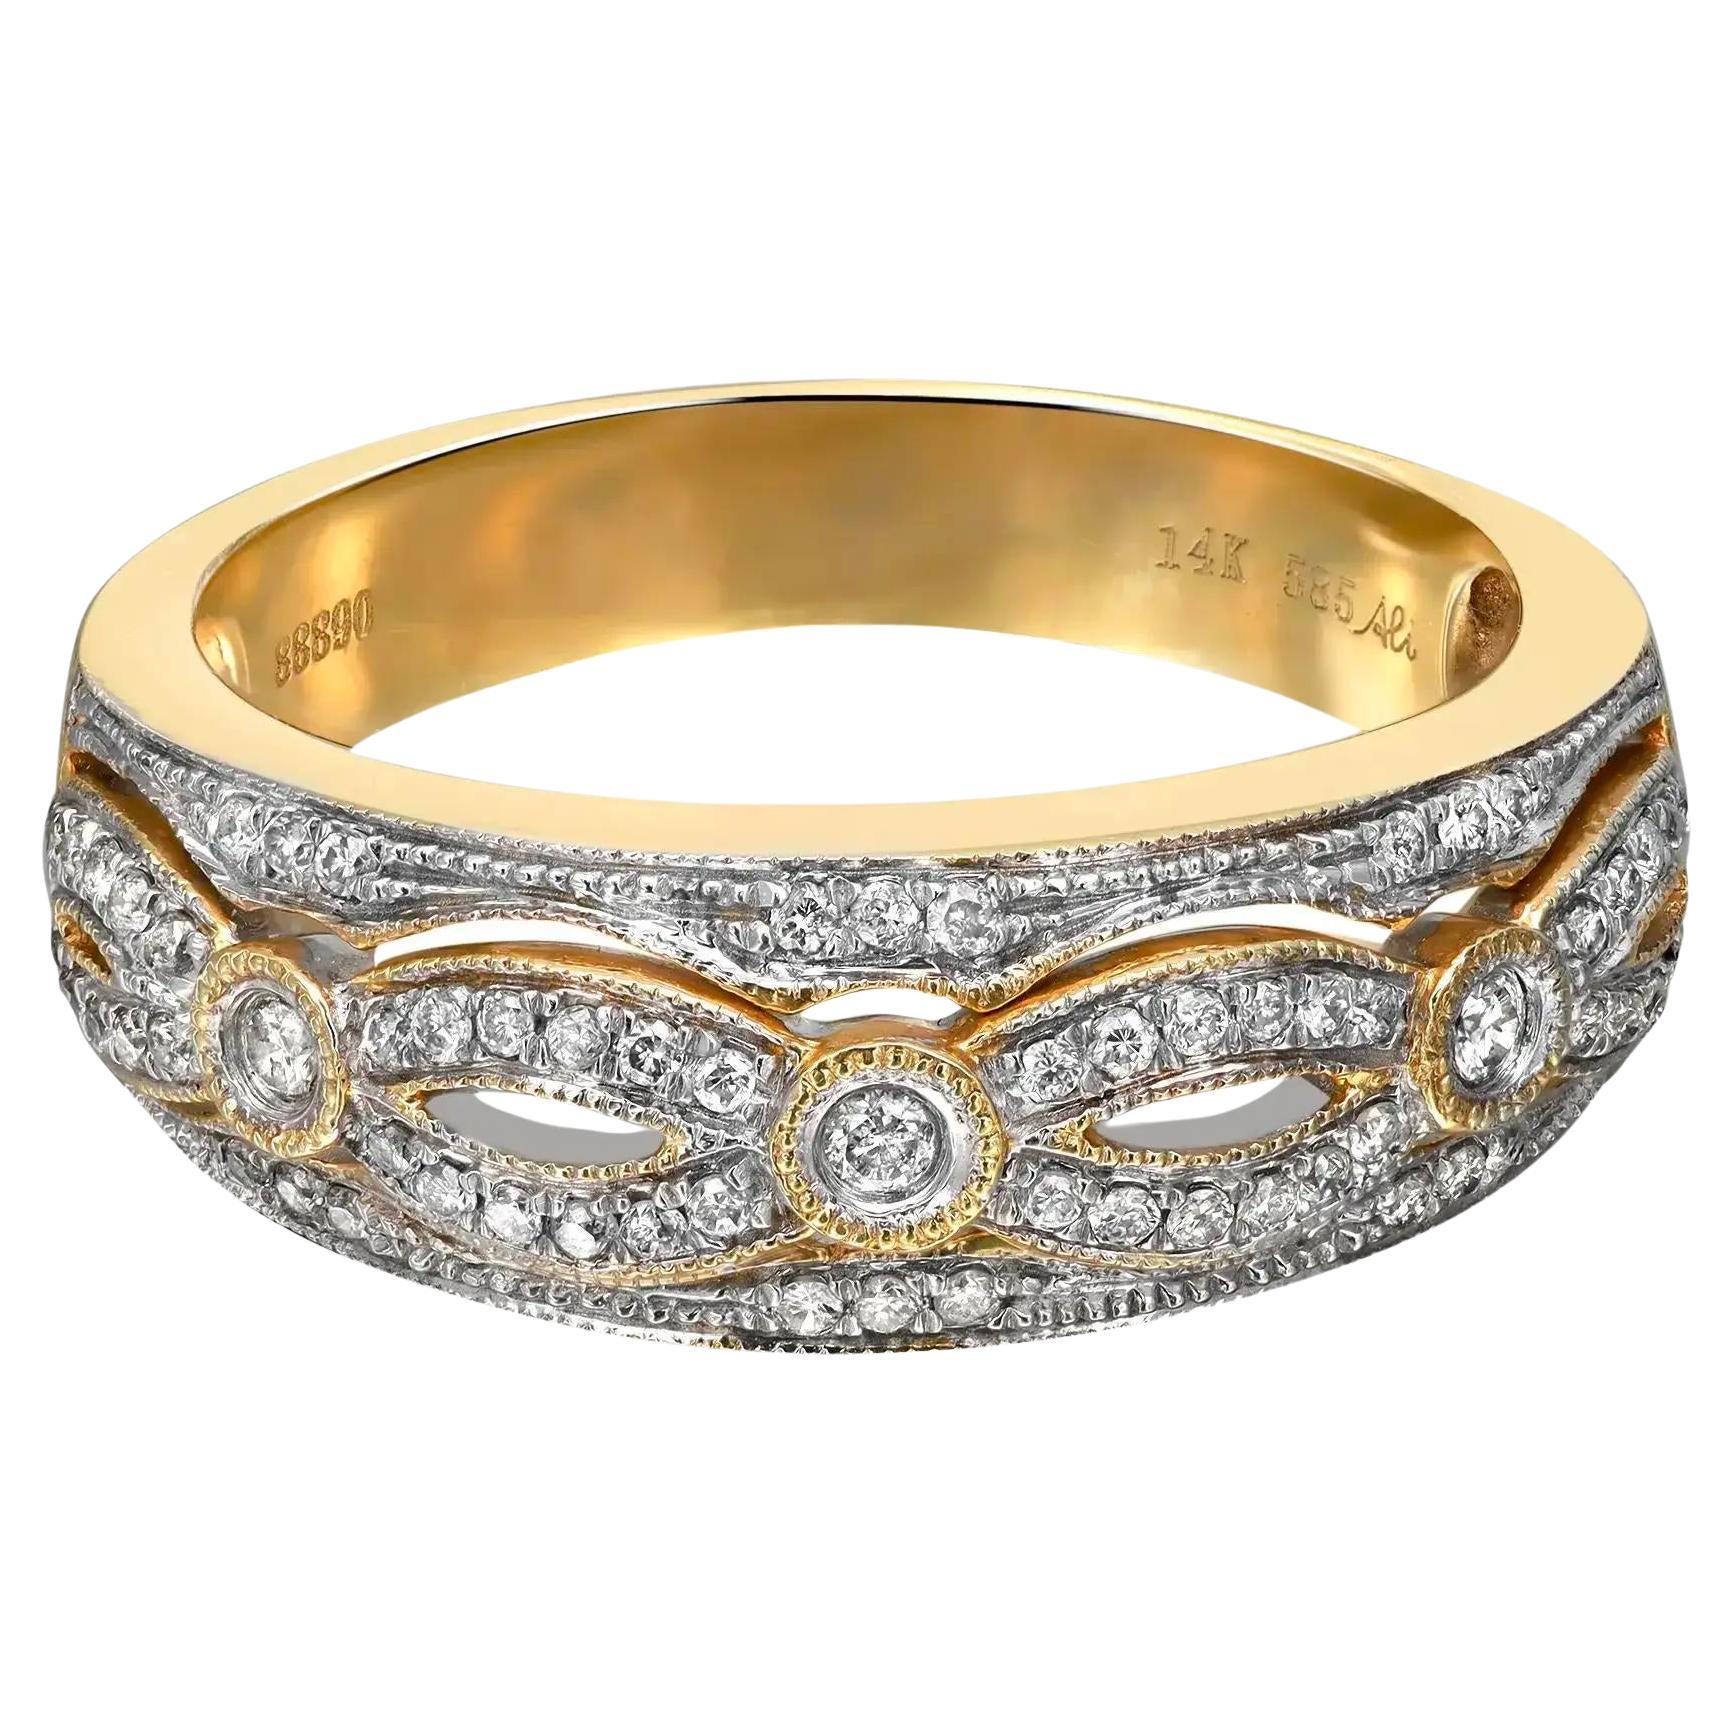 0.26cttw Pave Set Round Cut Diamond Ladies Band Ring 14k Yellow Gold For Sale